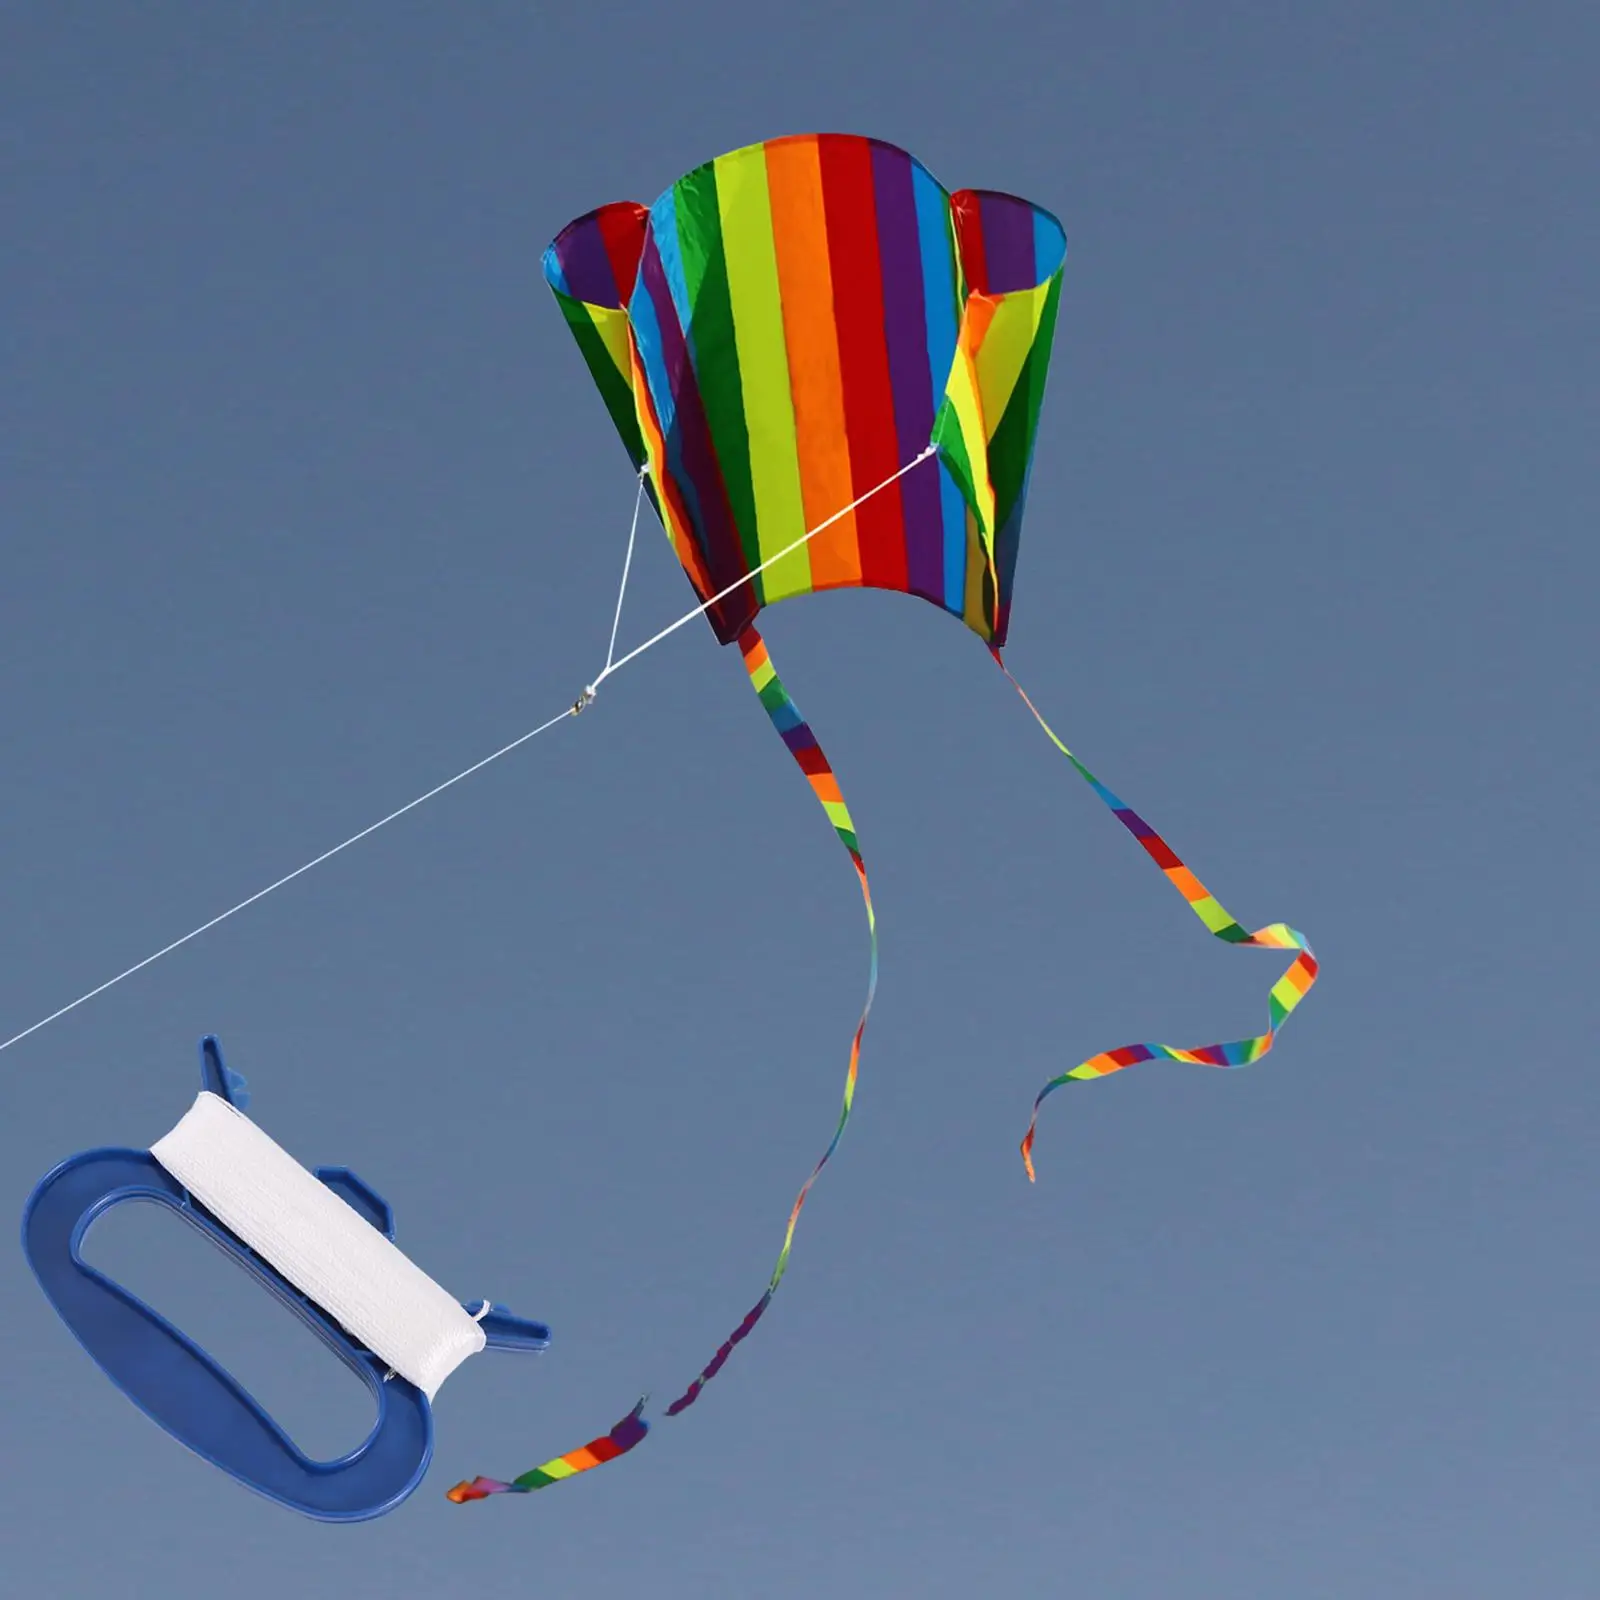 Beautiful Rainbow Kite Fun Outdoor Toys Easy to Fly with Flying Line Single Line Kite for Family Girls Boys Kids Ages 8-12 Gifts